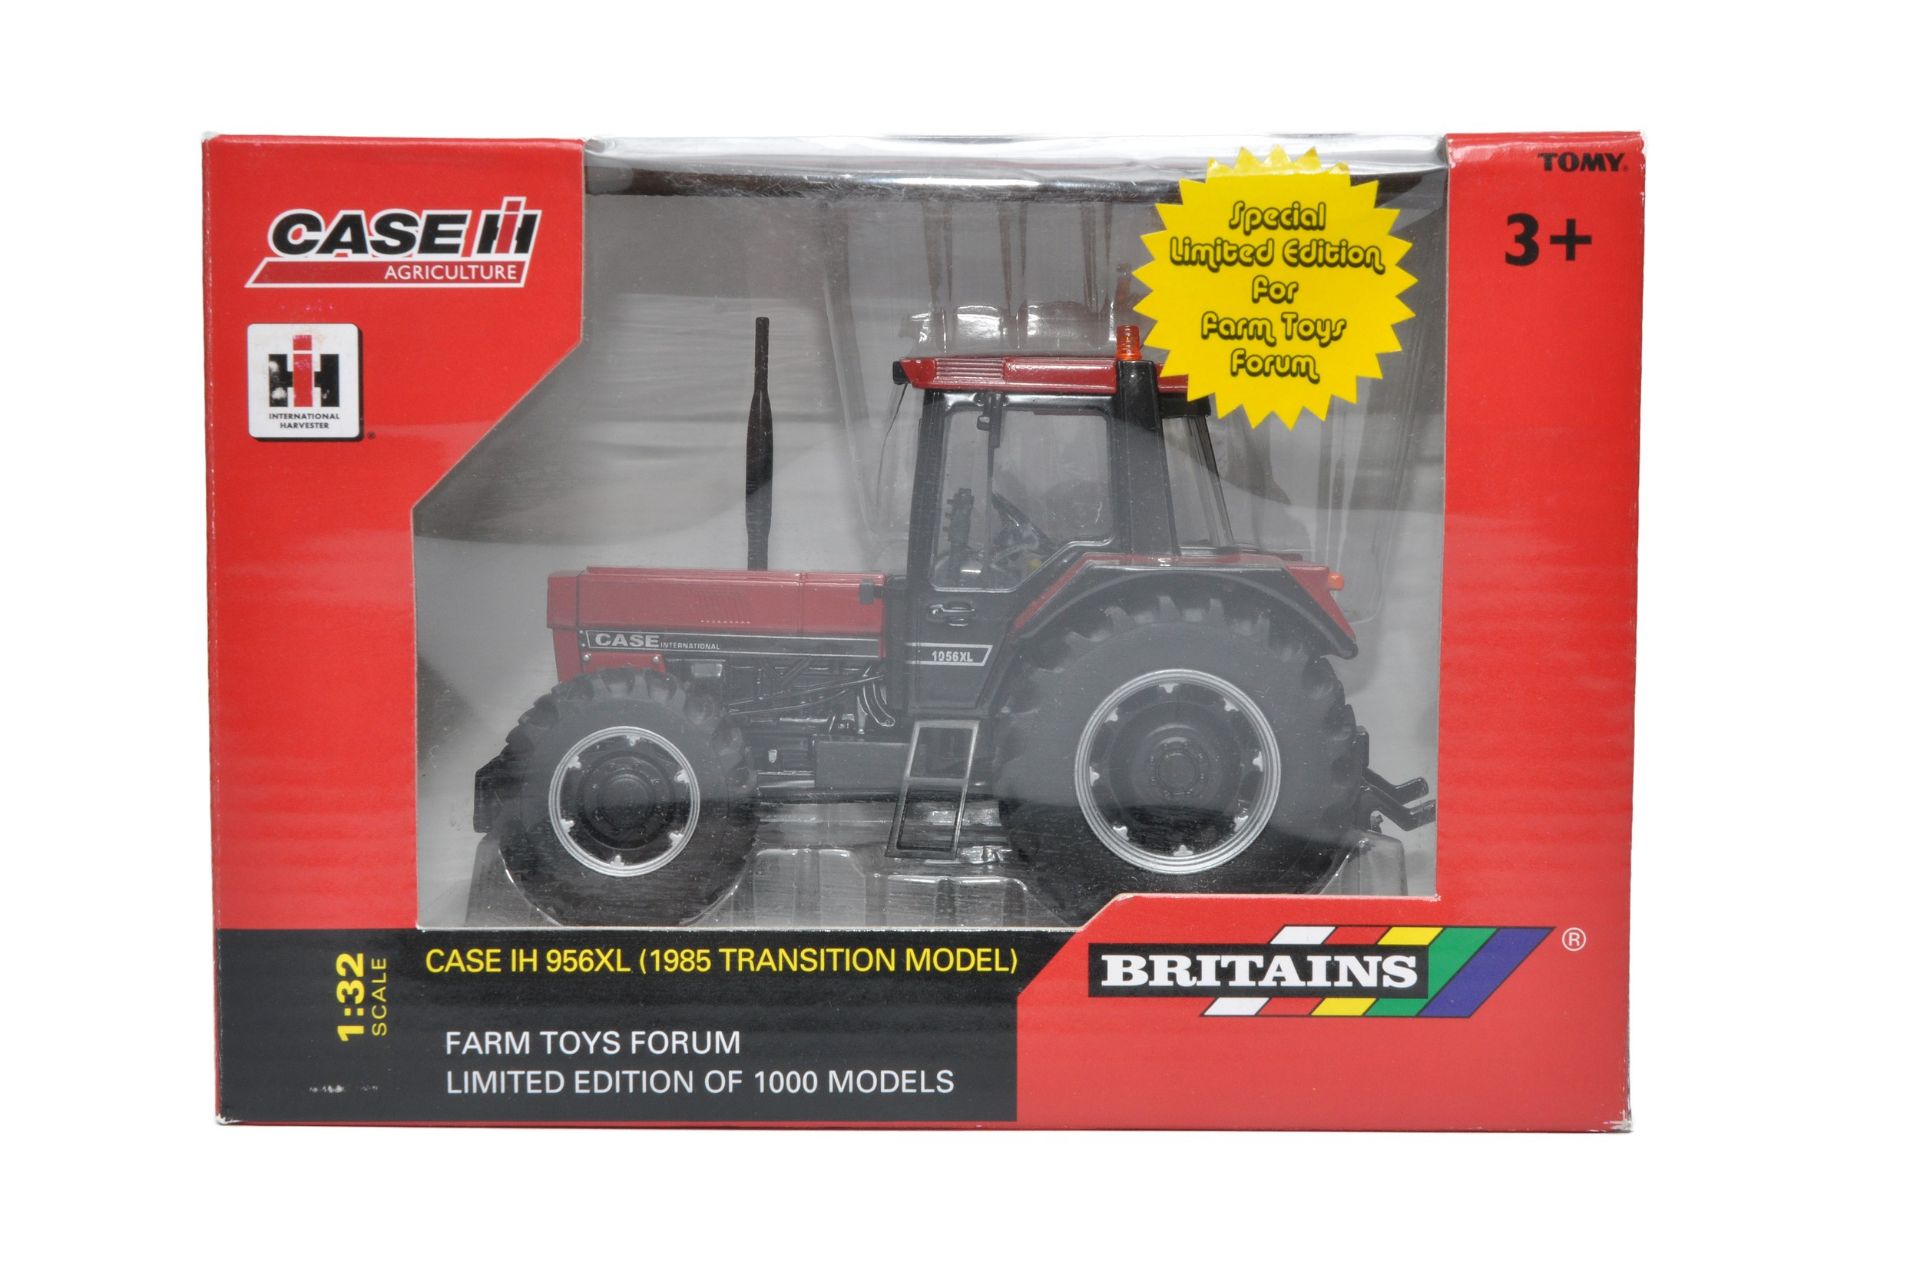 Britains 1/32 Farm Model issue comprising No. 42868 Case IH 956XL (Transition Model) Tractor.